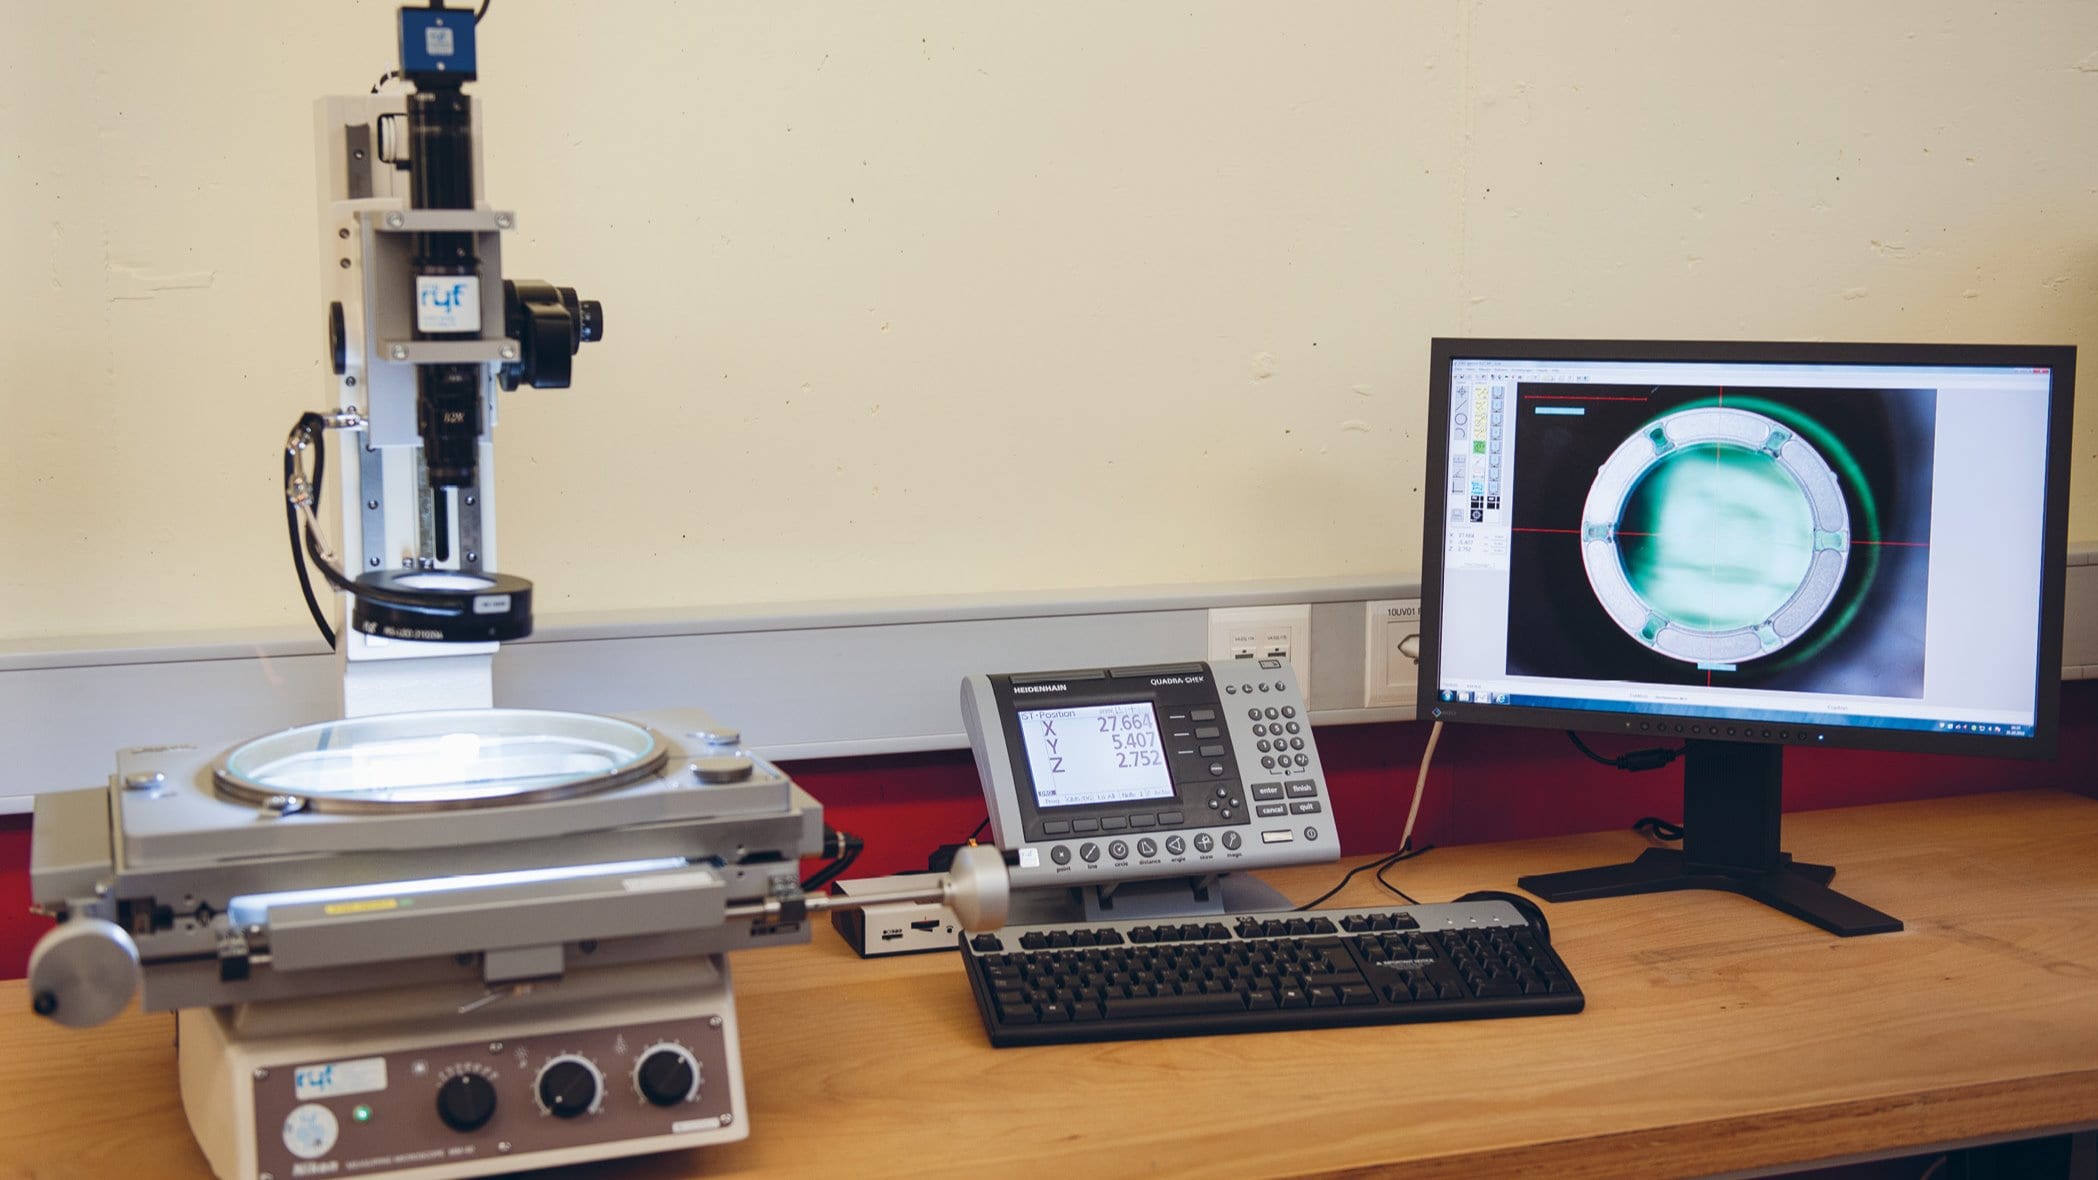 The light conductor is measured on the measuring
microscope and the visual quality inspected.